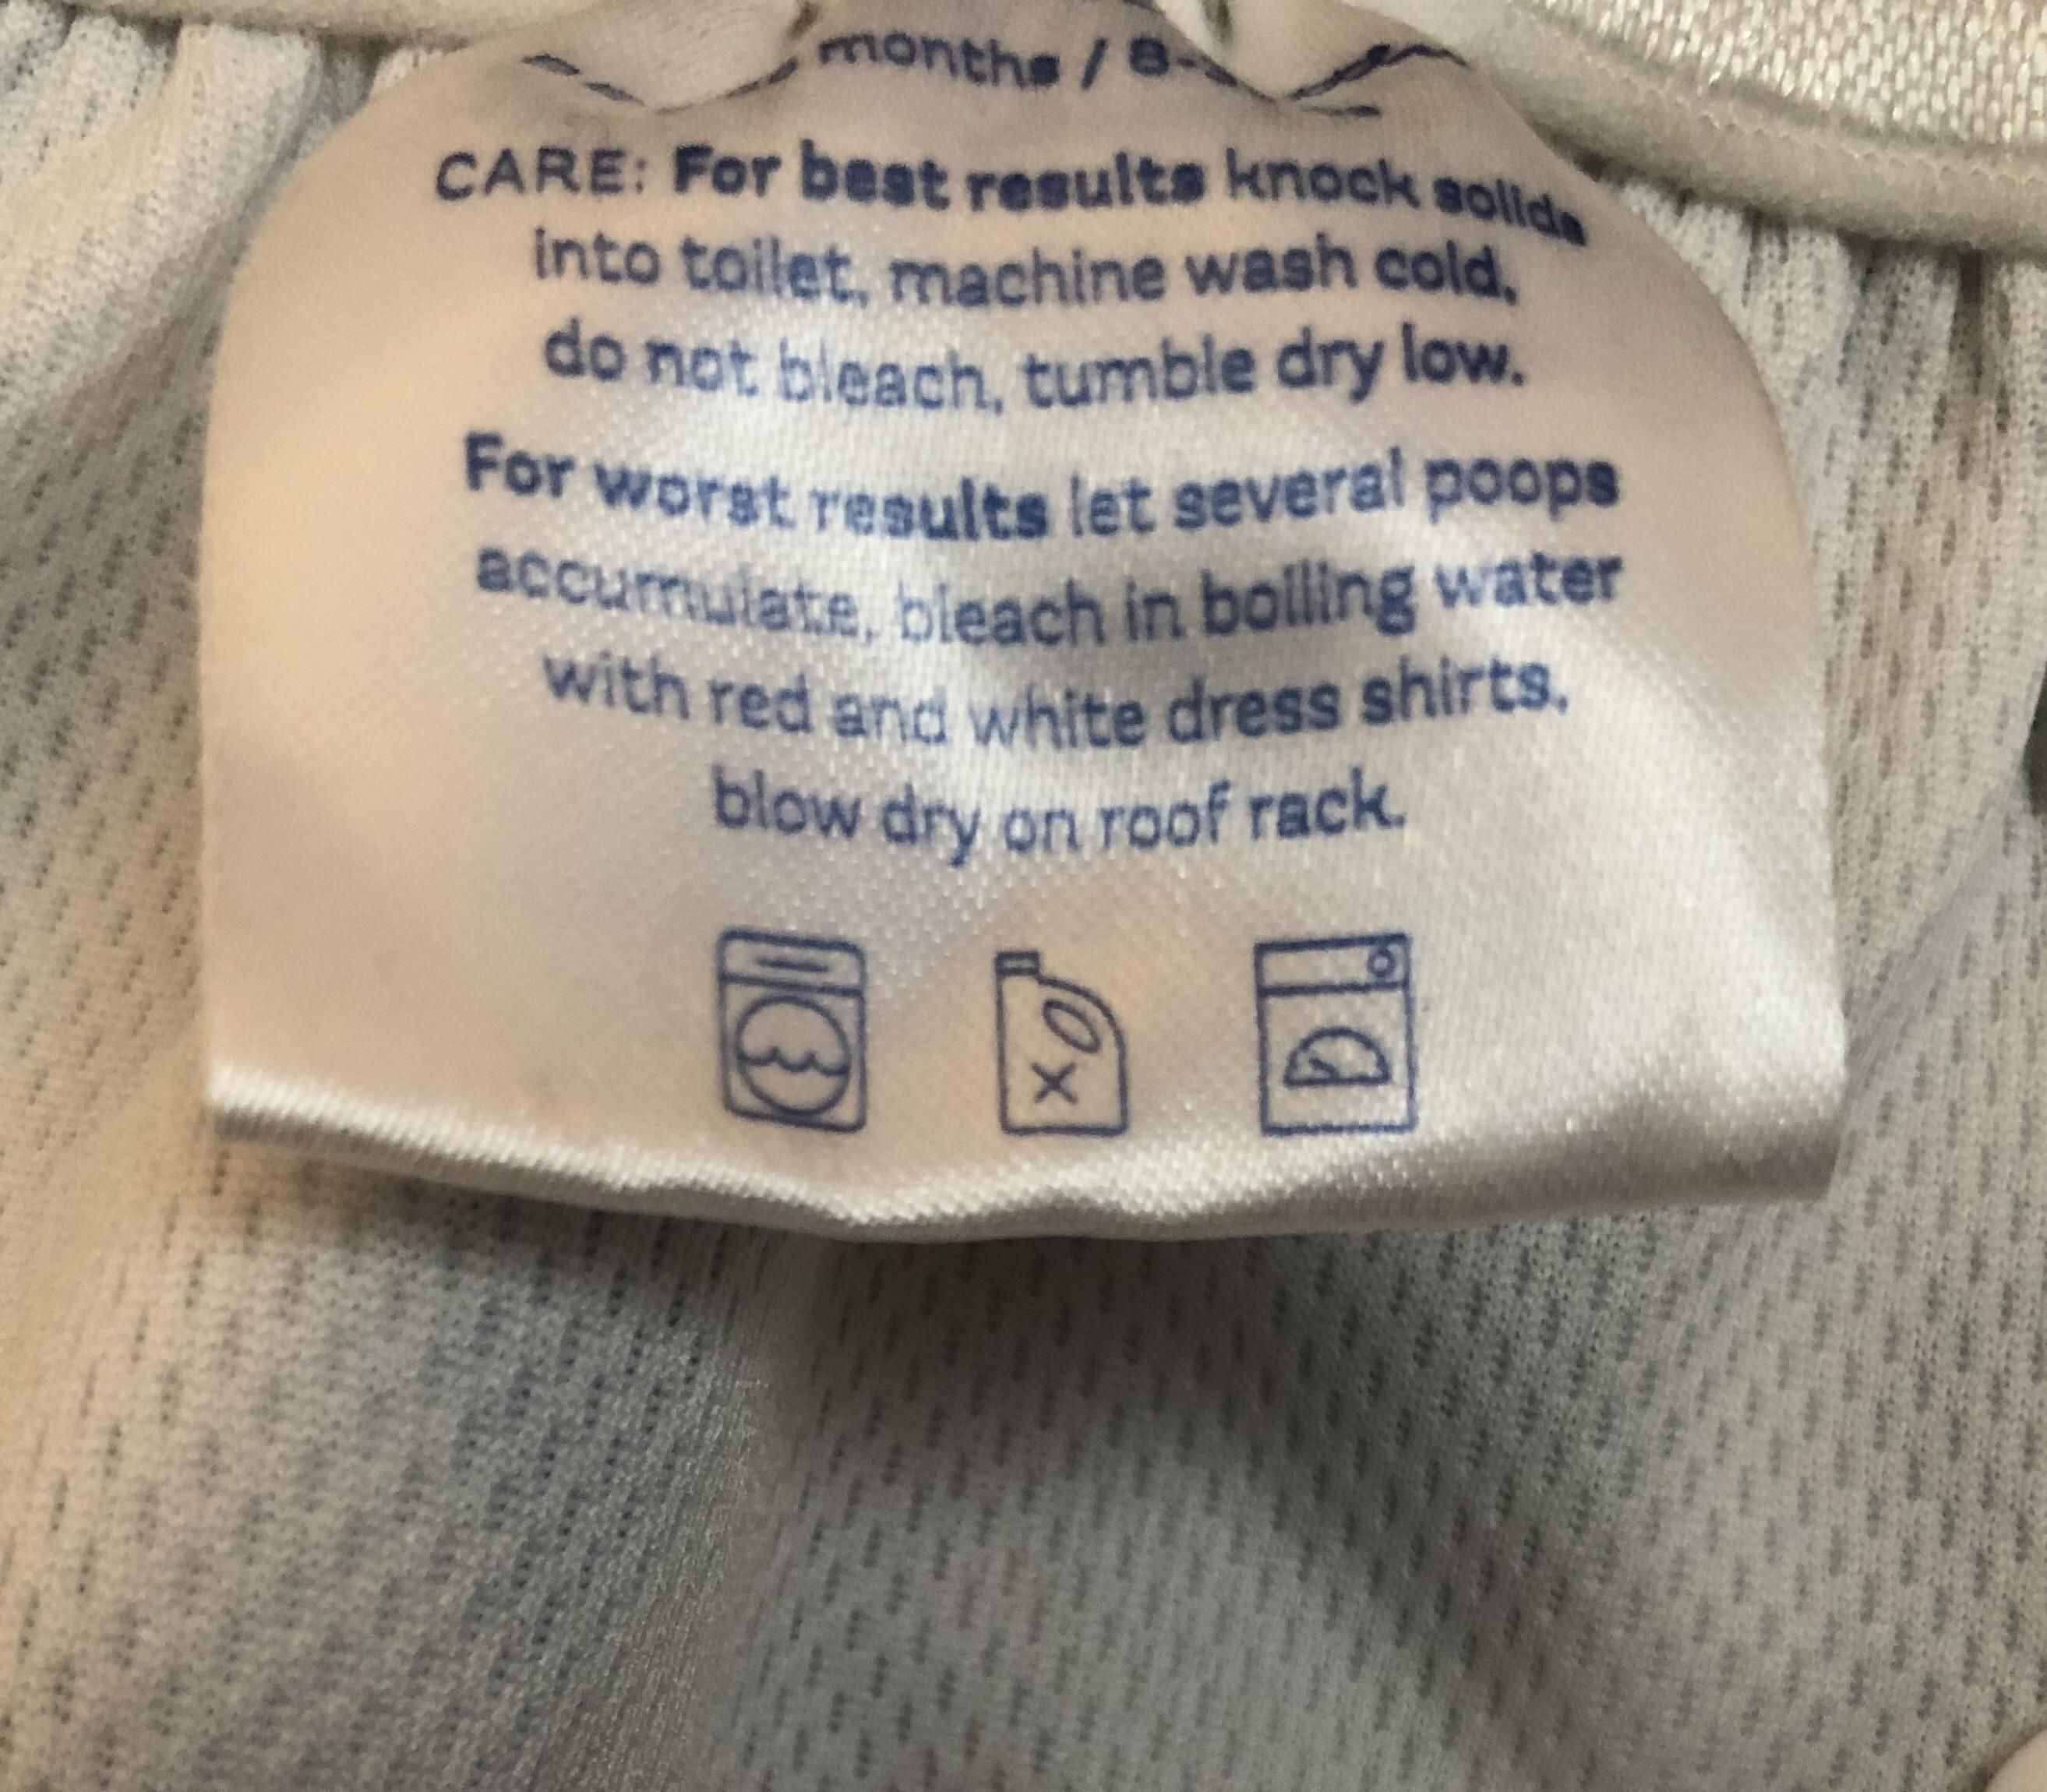 This tag on my daughter’s reusable swim diaper.